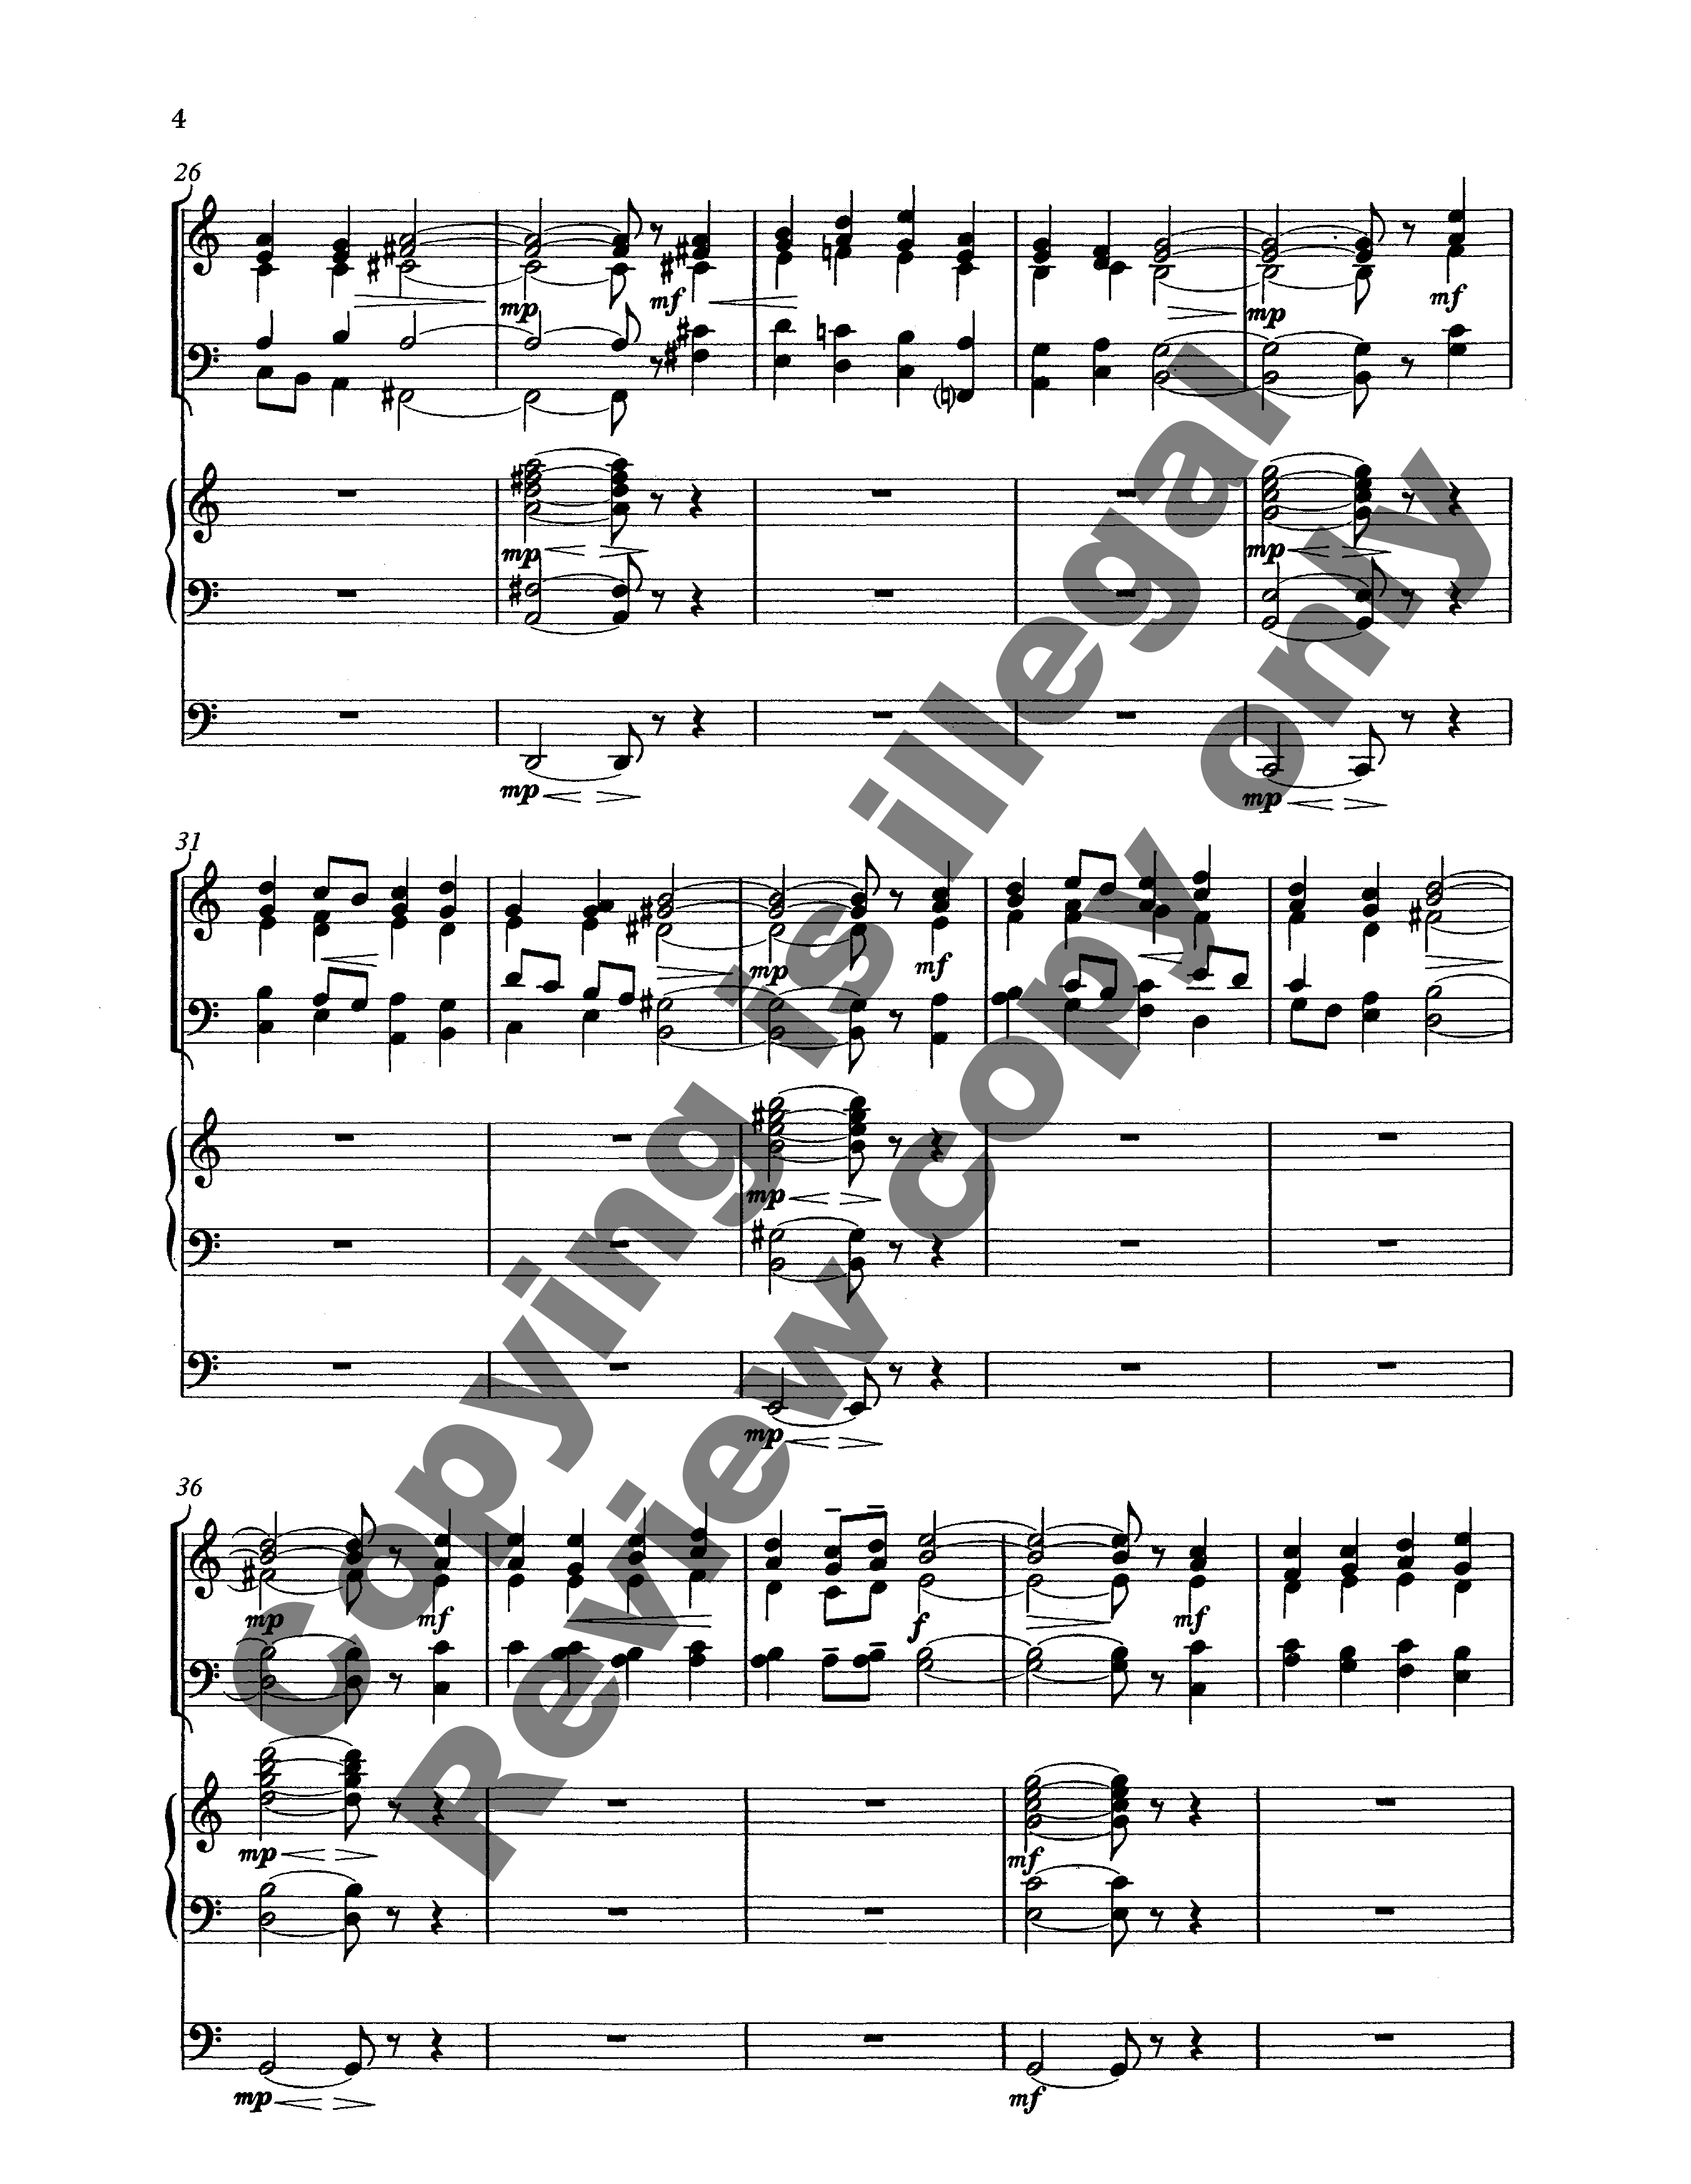 INTRODUCTION AND CHORALE FOR ORGAN